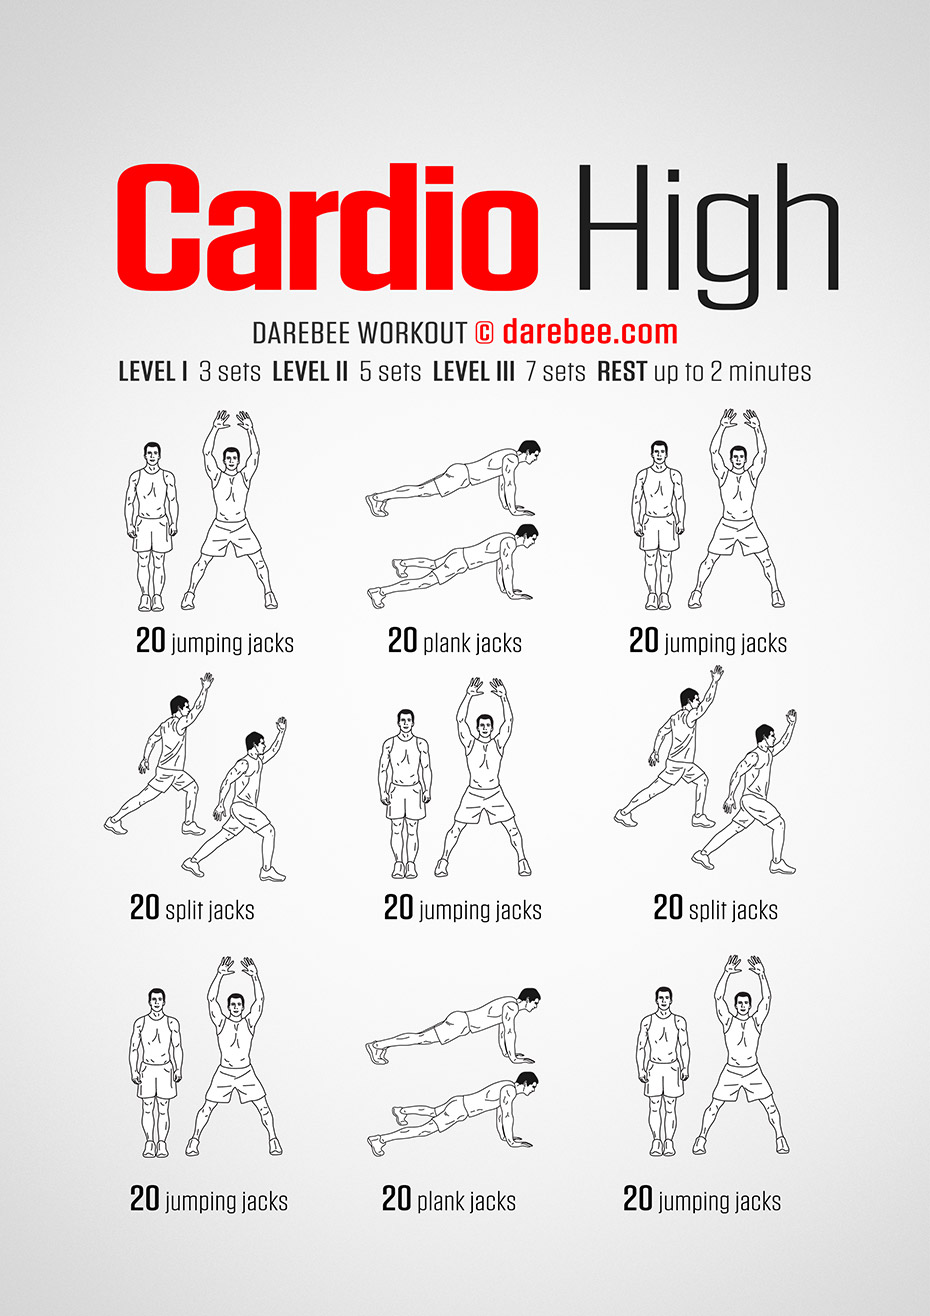 View Quick In Home Cardio Workout Pictures - hiit cardio workout plan